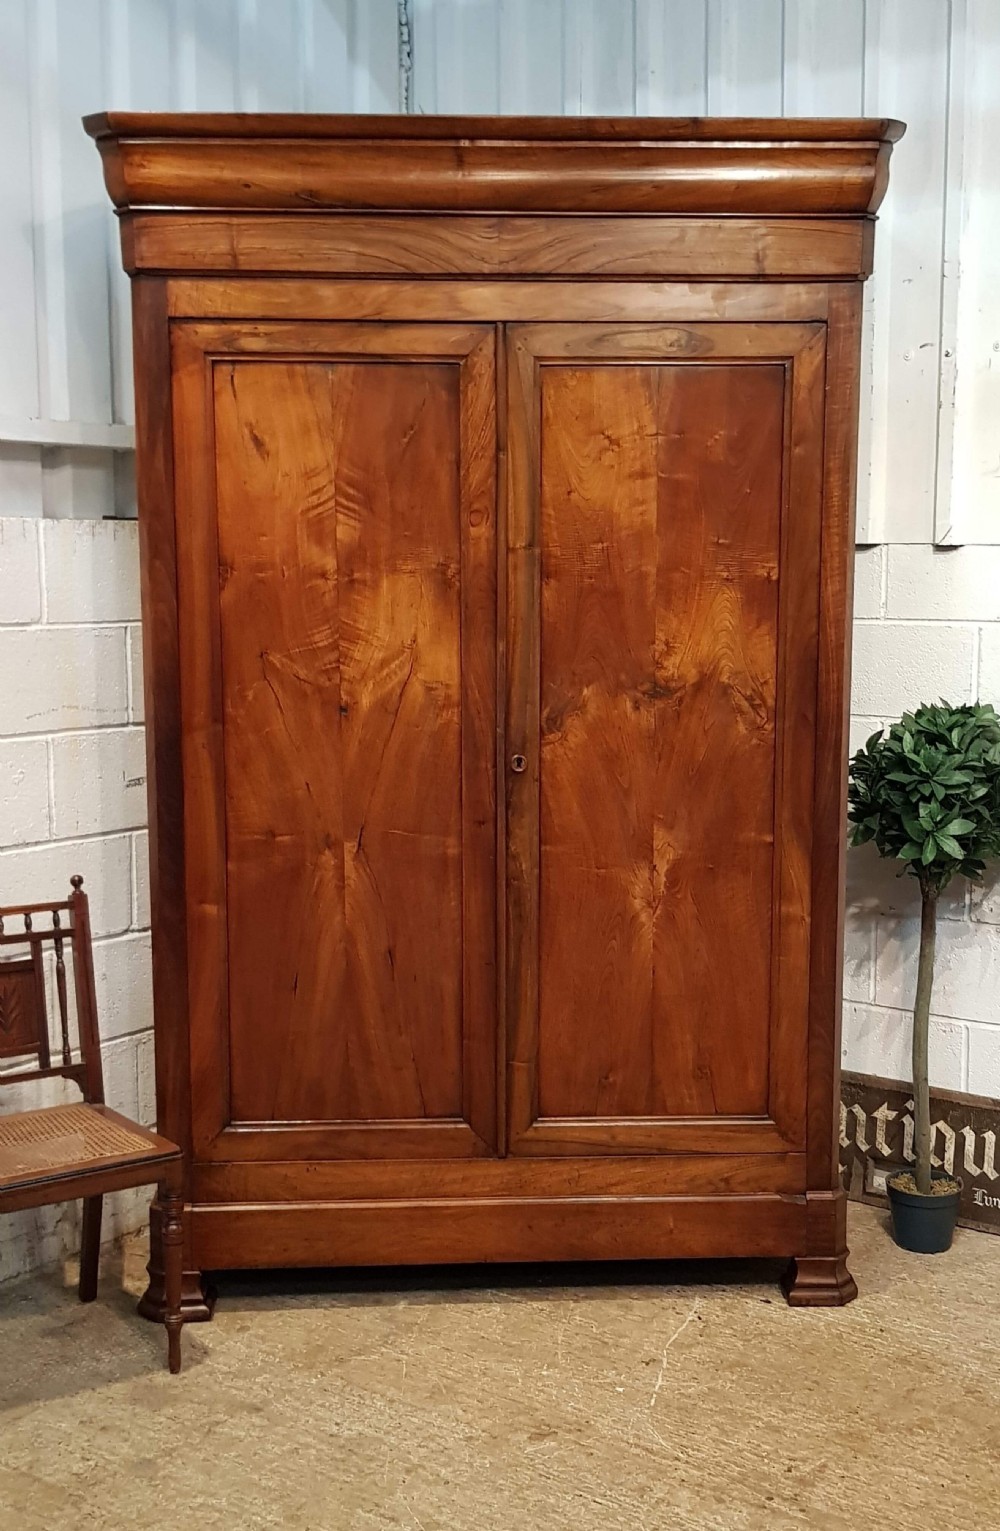 antique large french provincial fruitwood armoire wardrobe with secret drawer c1860